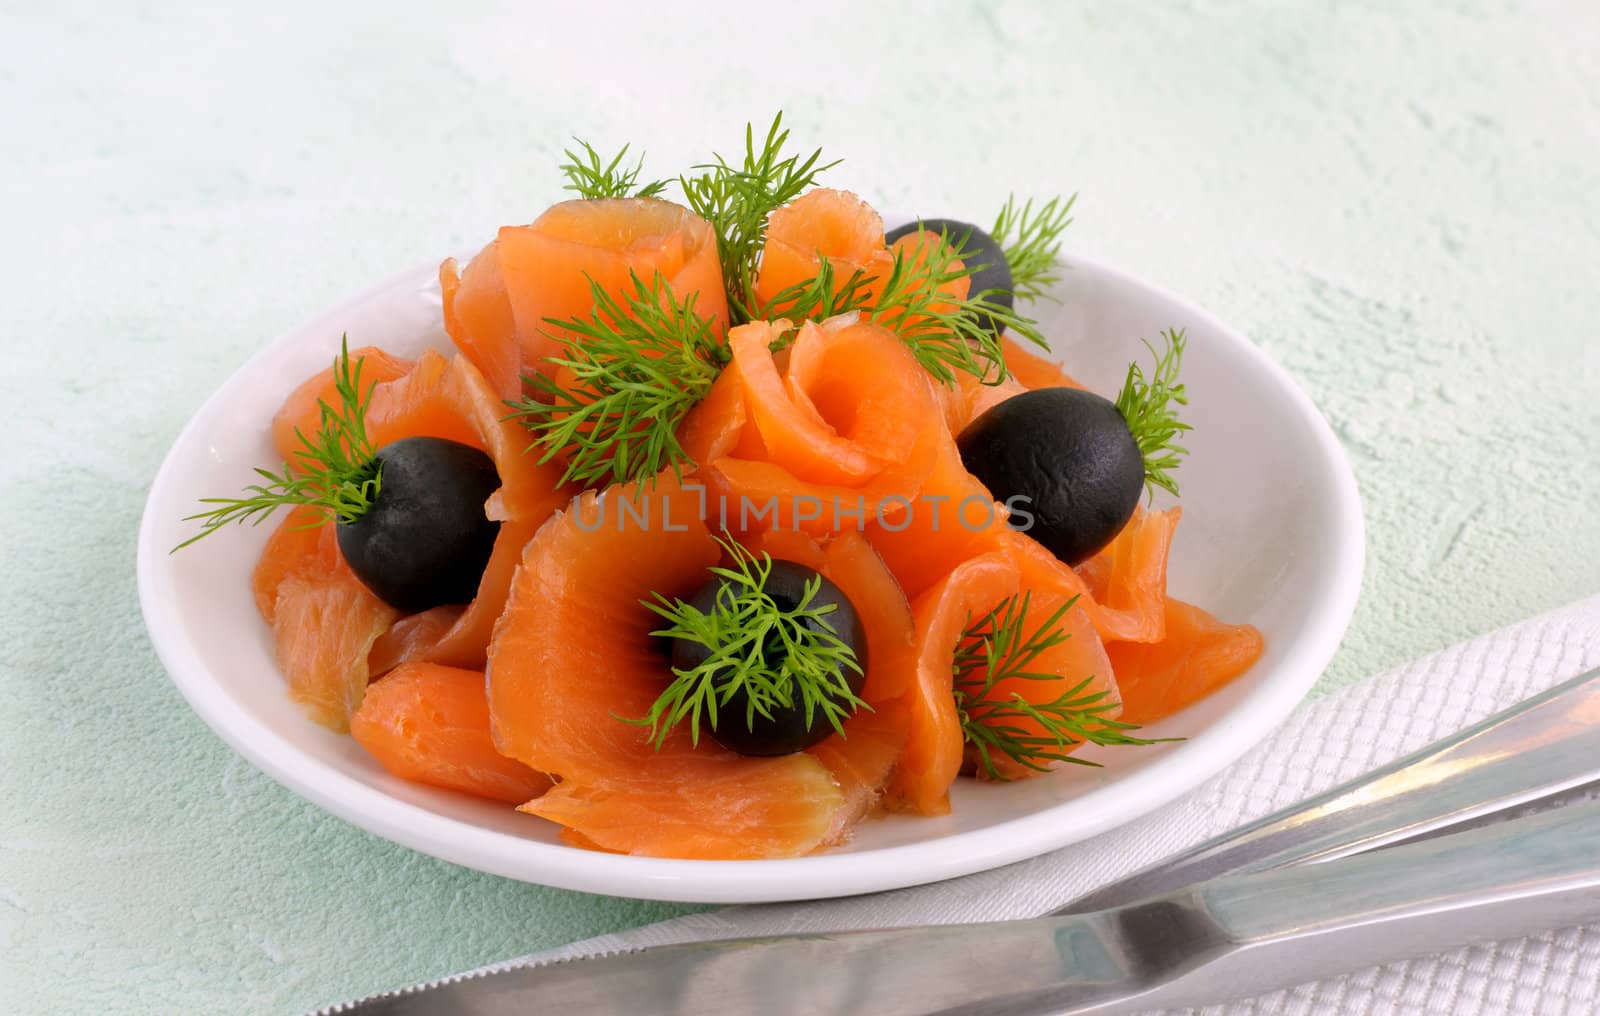 Appetizer of Salmon by Apolonia